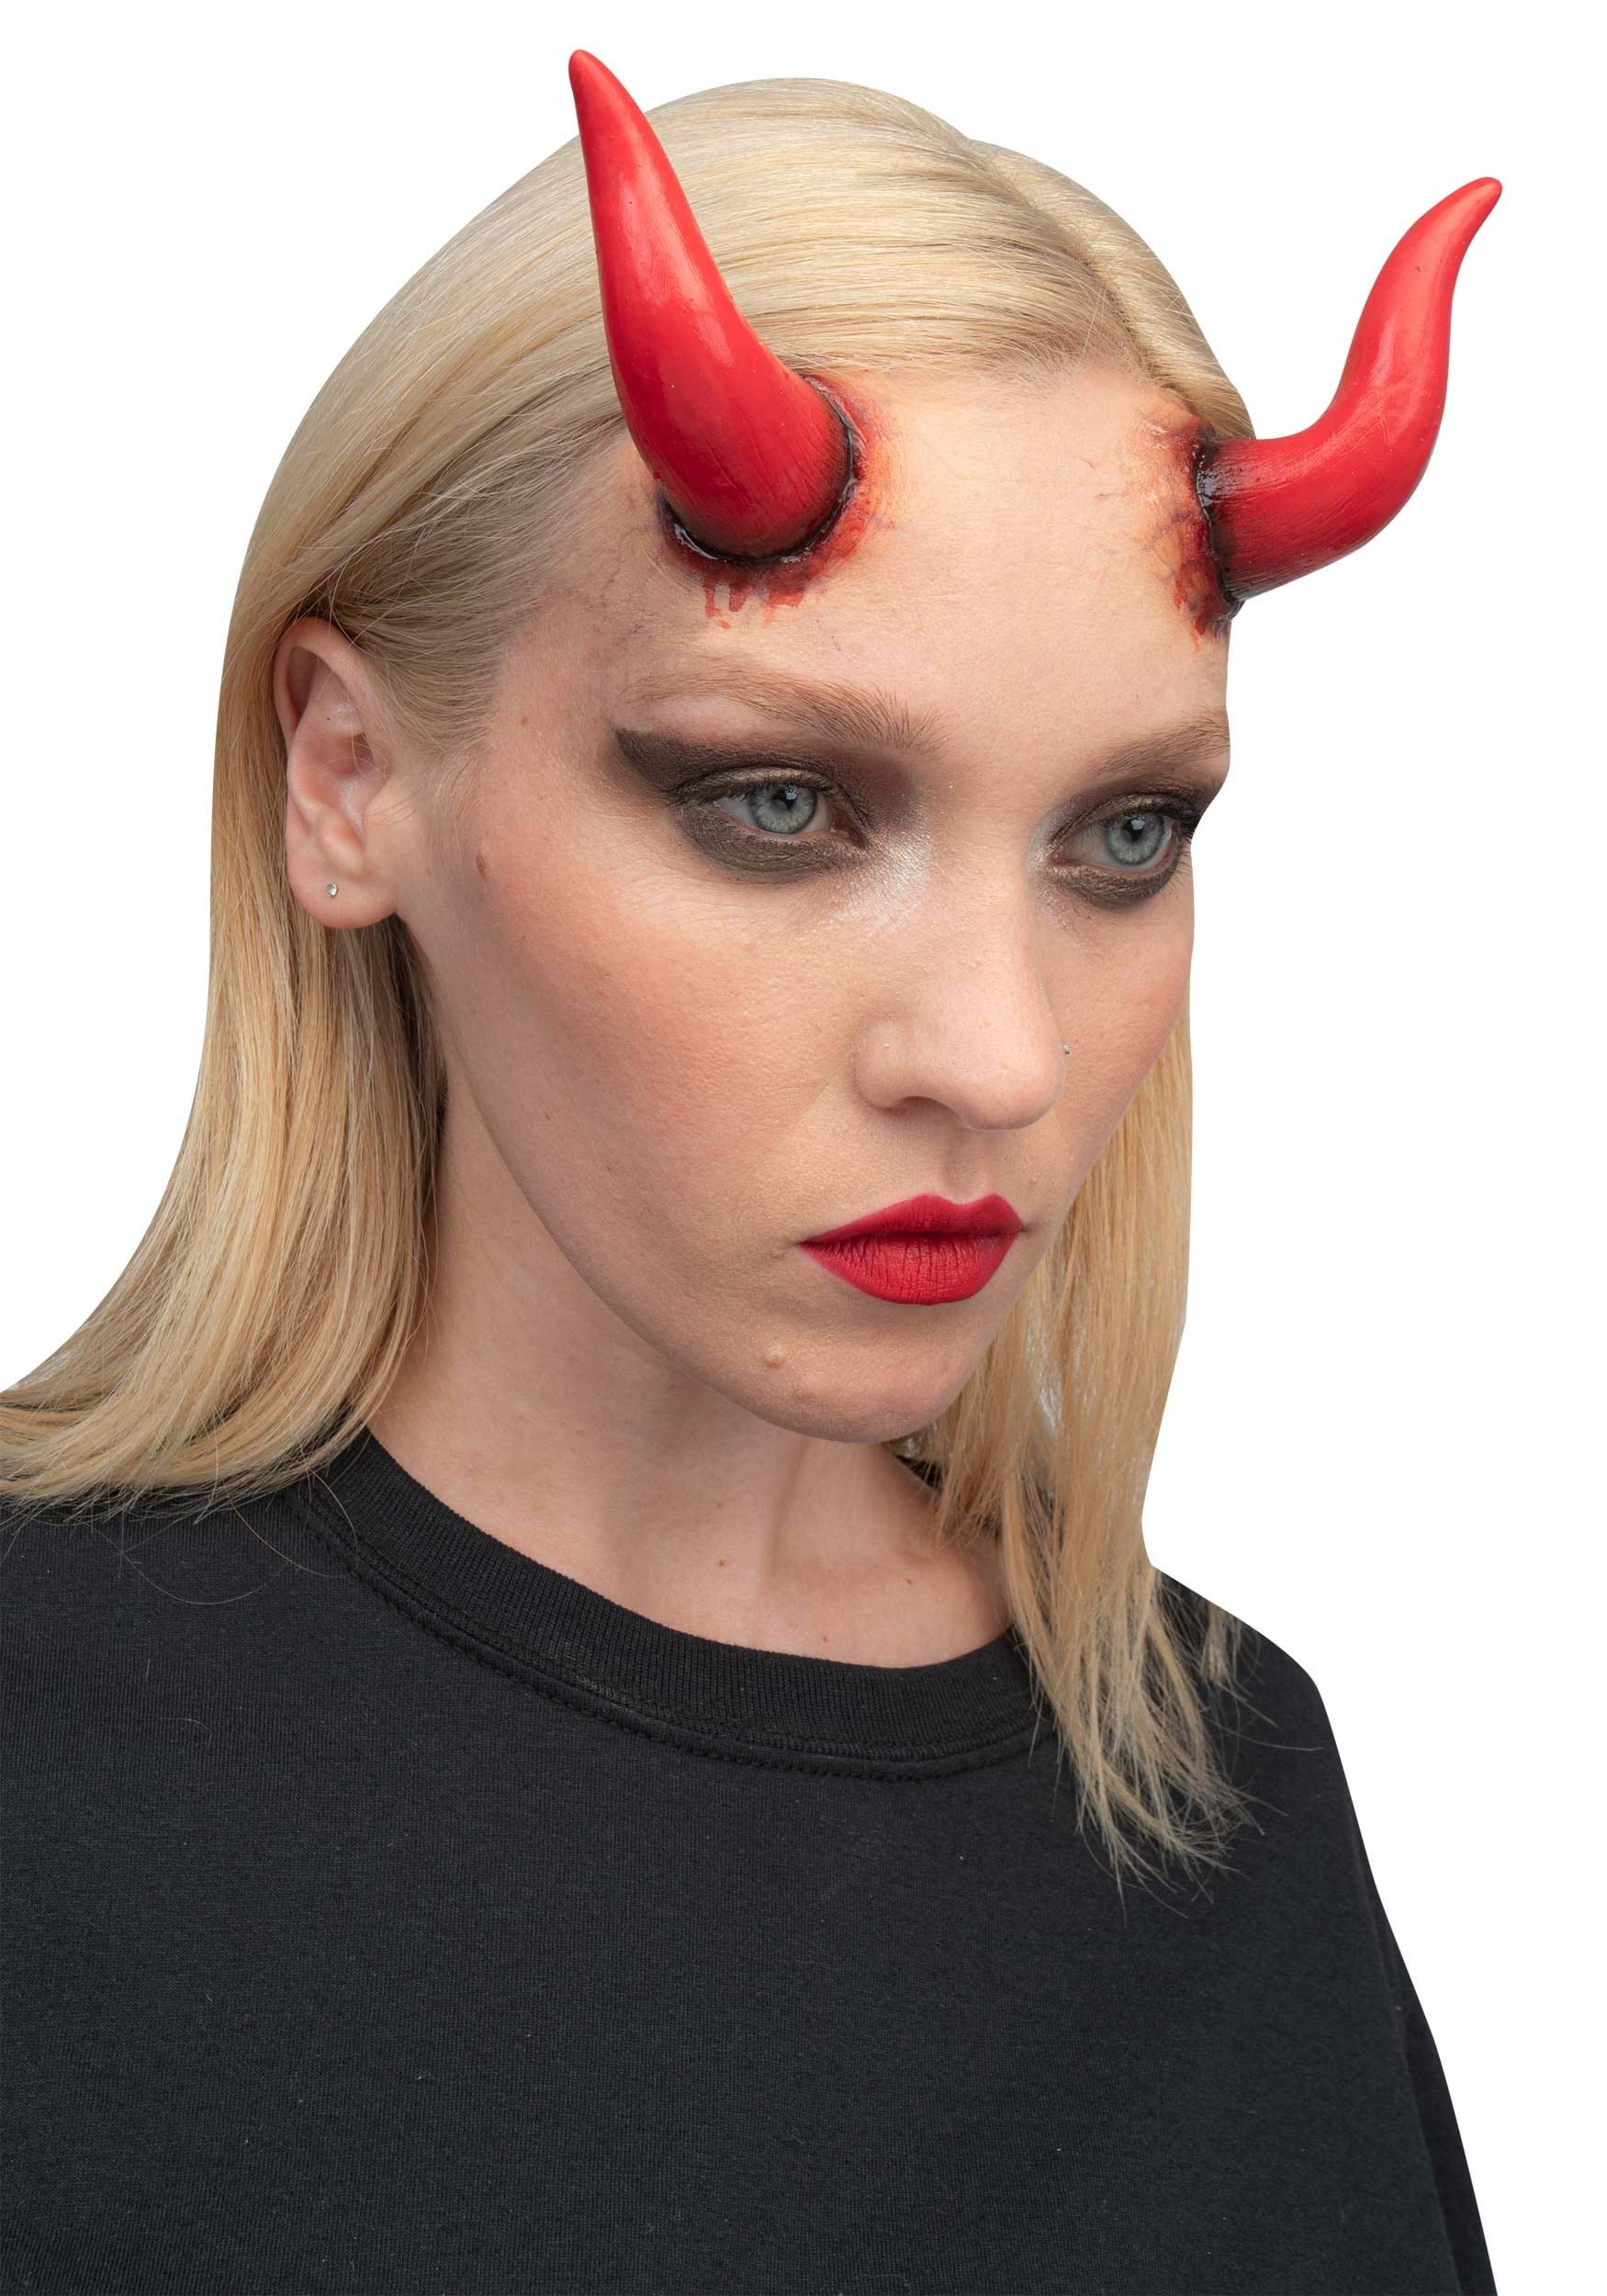 Red Devil Horns Applique , Costume Makeup And Accessories